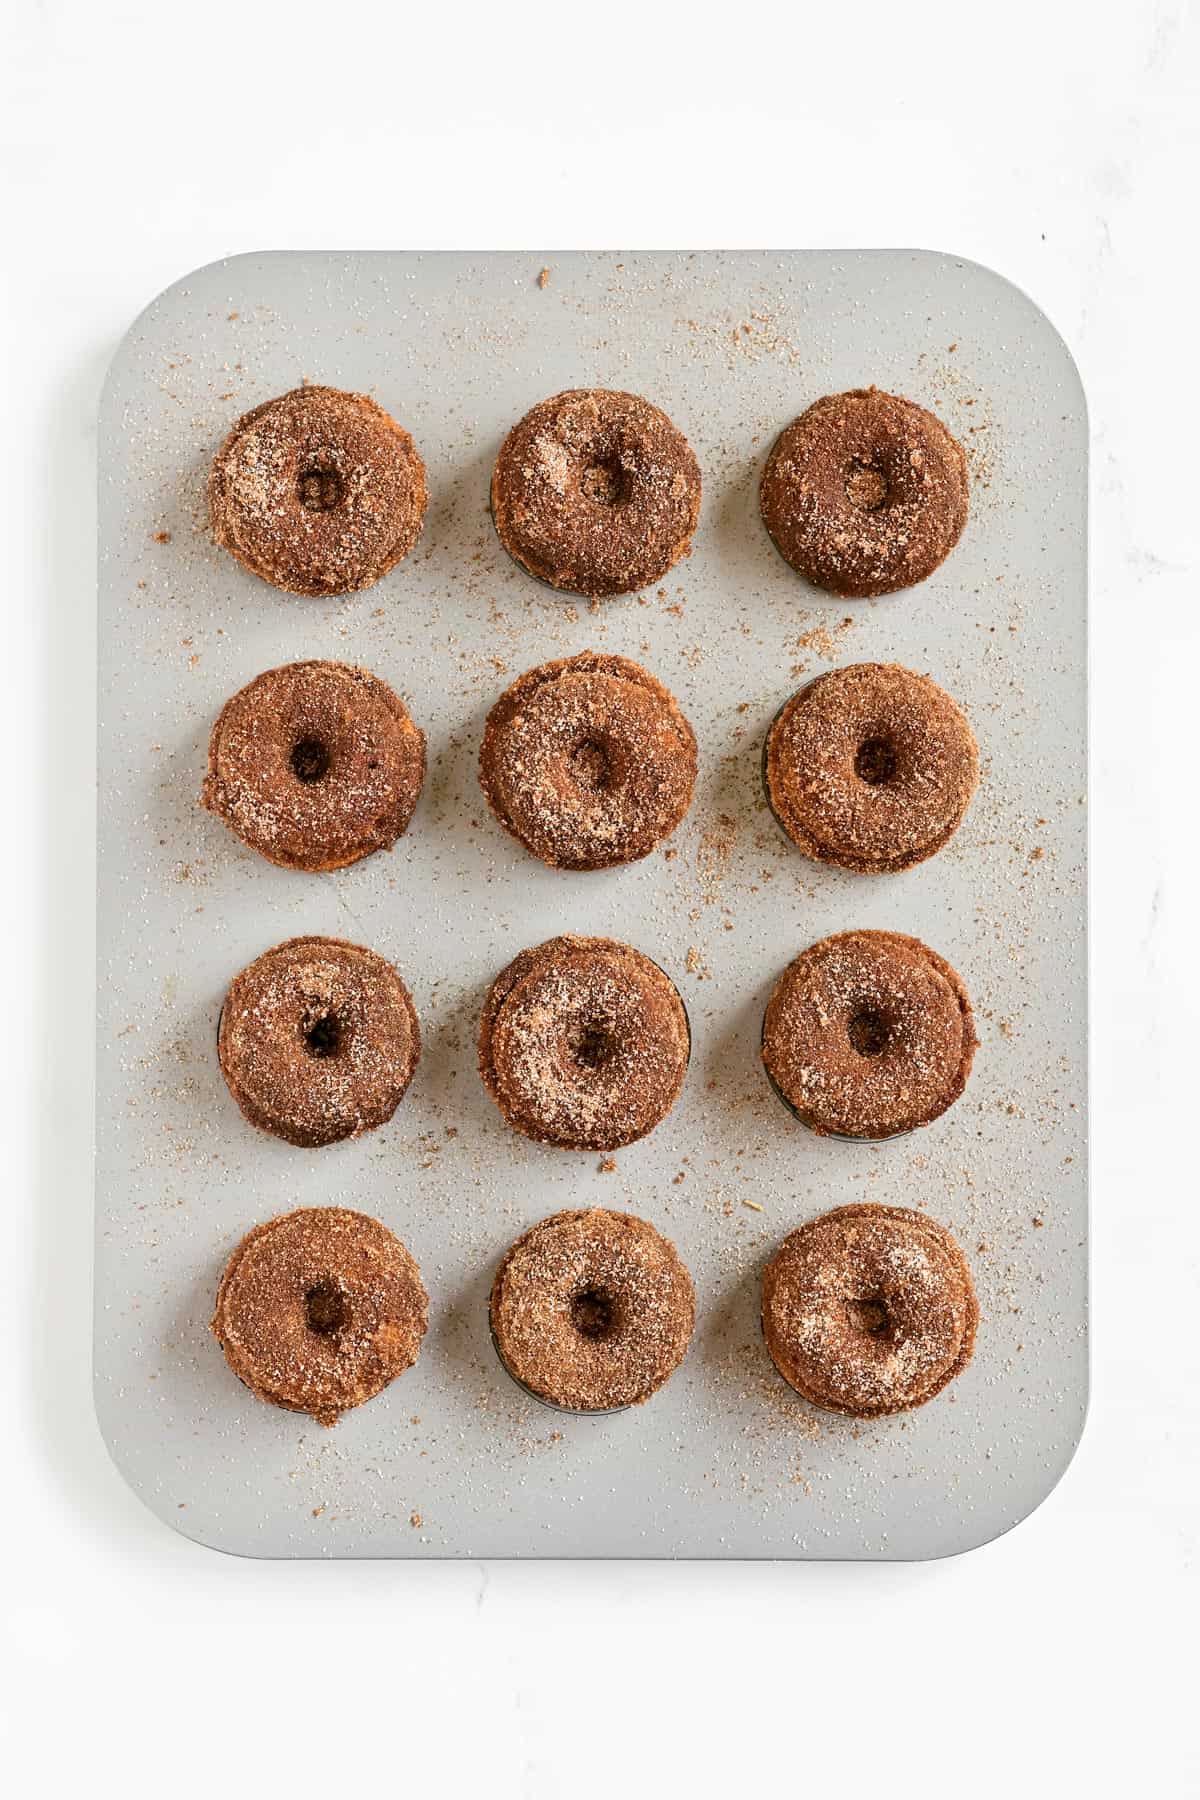 Apple cider mini donuts in a pan.